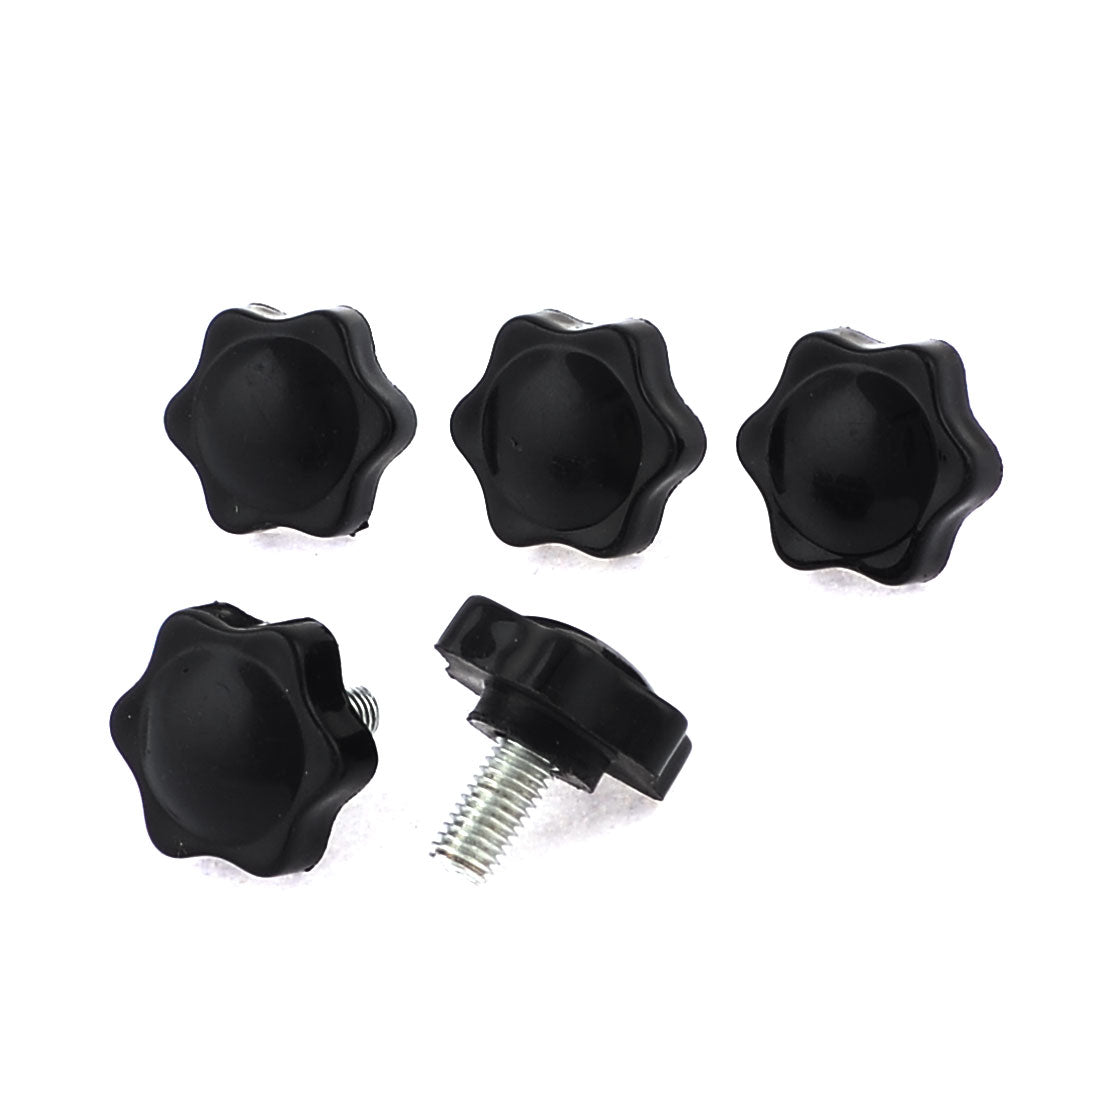 uxcell Uxcell 8mm x 15mm Male Thread Pentagram Head 30mm Height Clamping Knob 5 Pcs